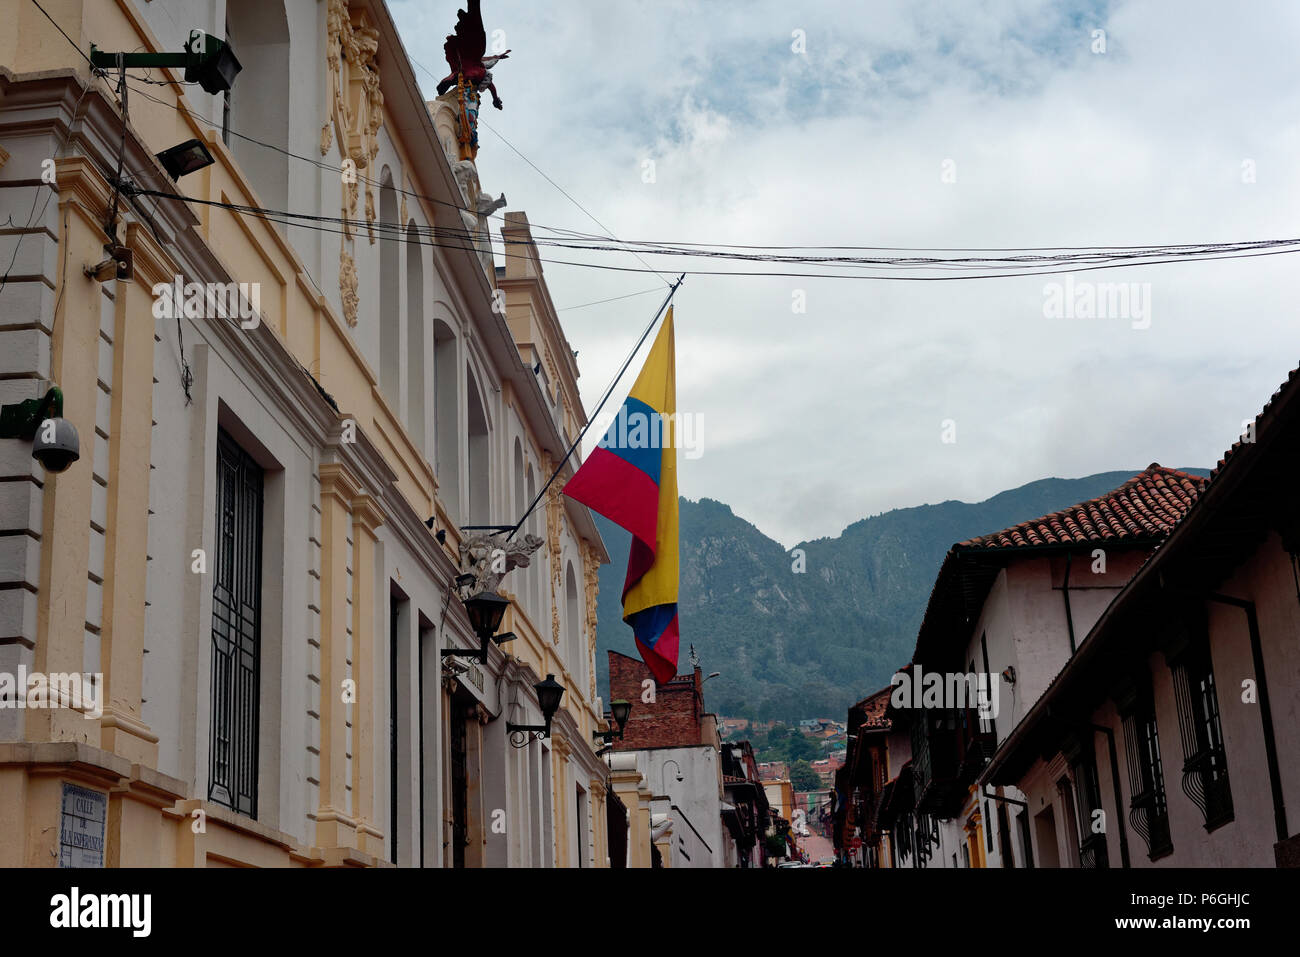 Street scene in central Bogota with national flag and mist covering the monserratte mountain behind, colombia Stock Photo